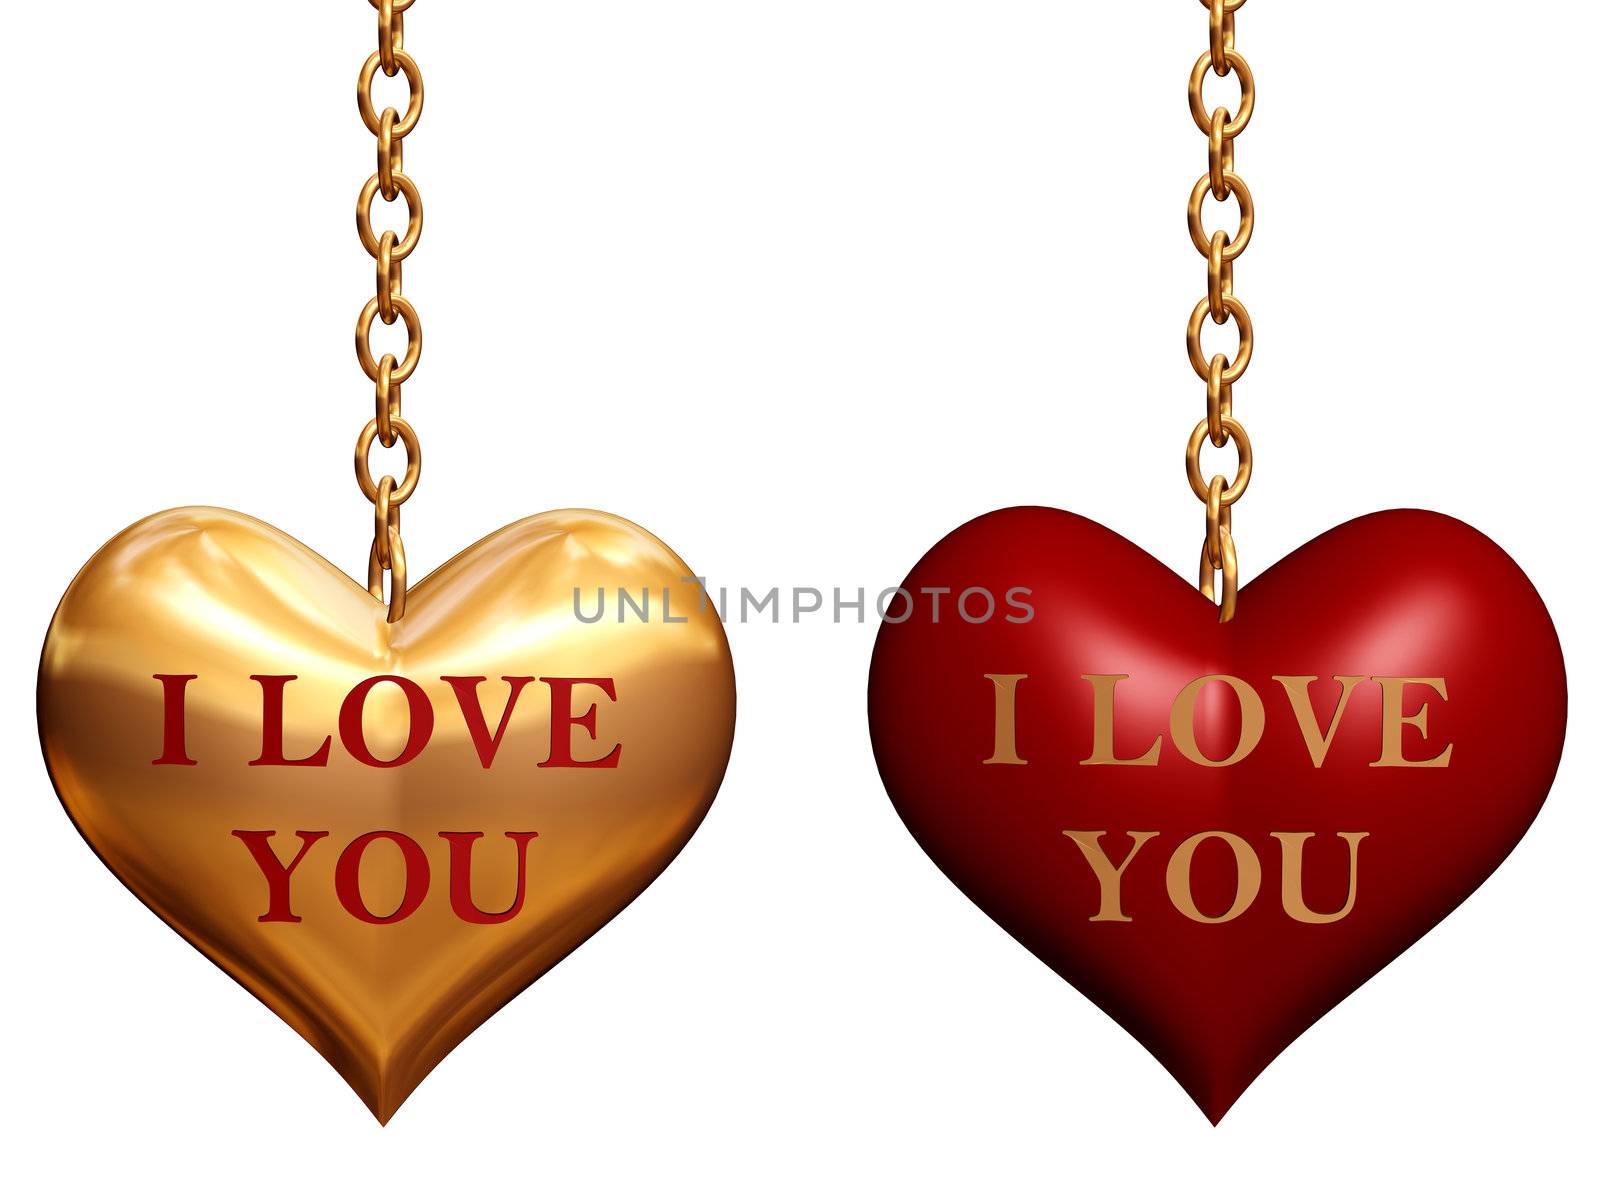 two hearts with chains by marinini